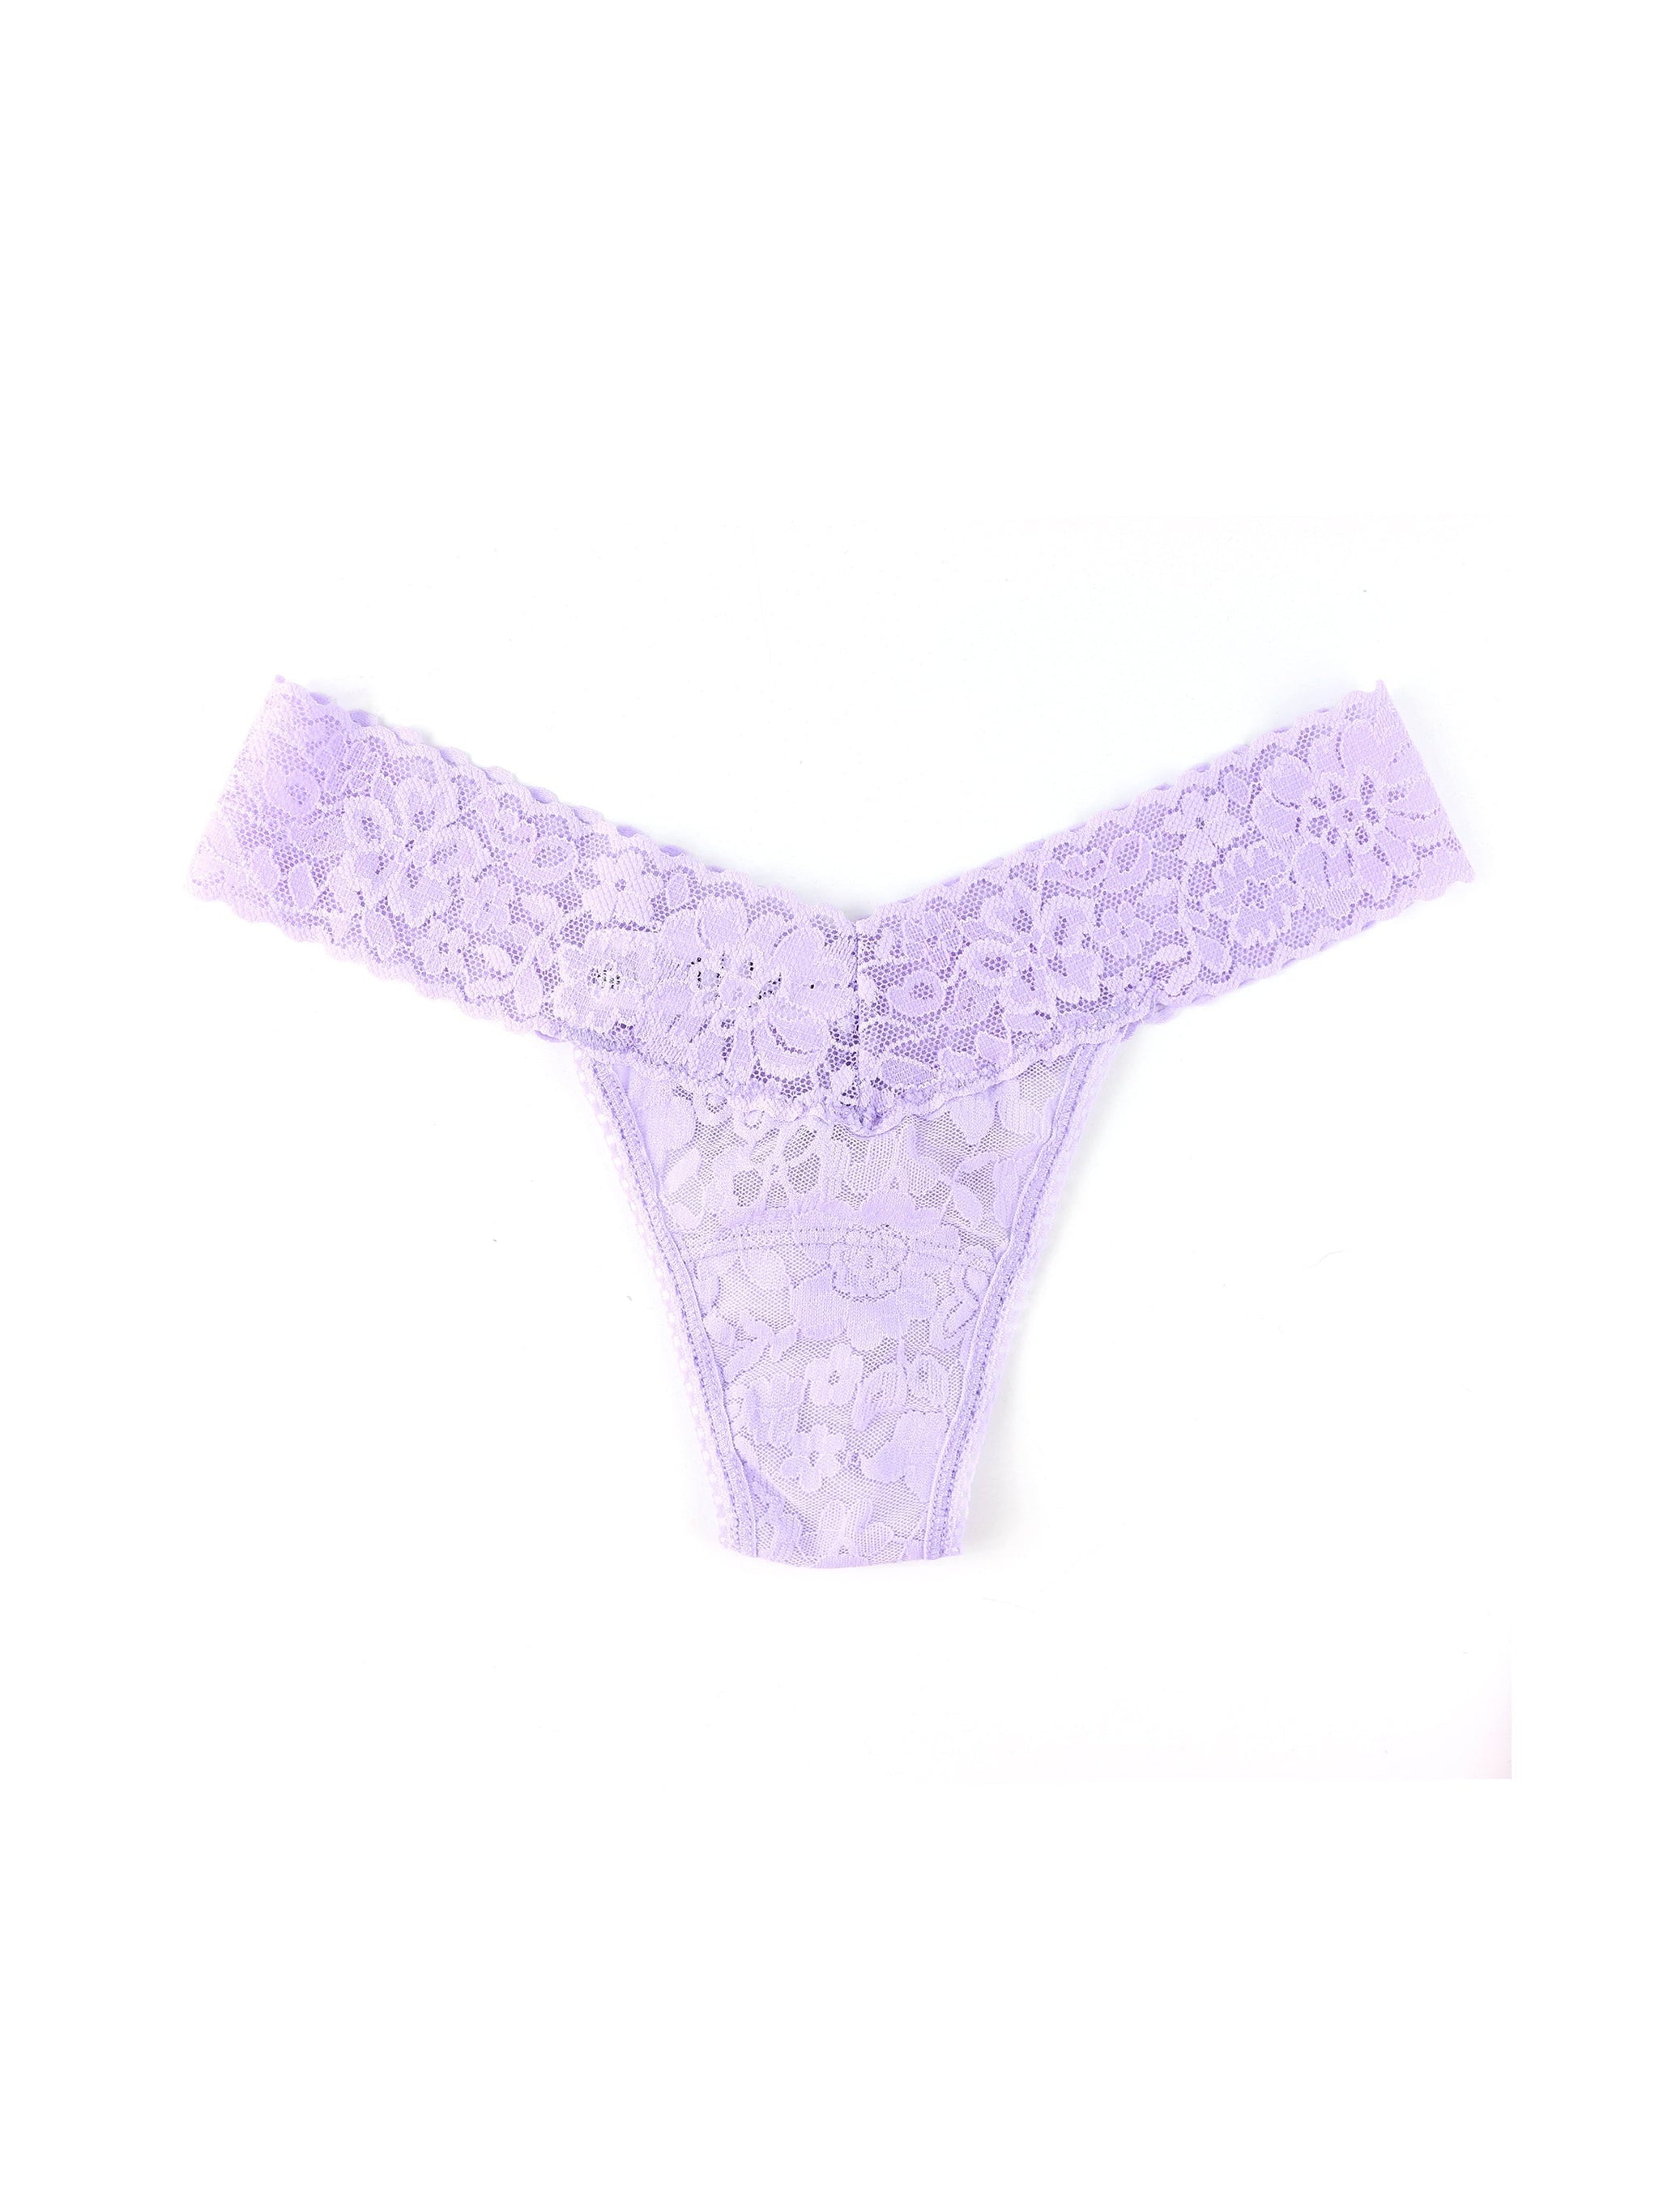 Daily Lace™ Petite Low Rise Thong Moon Crystal Sale